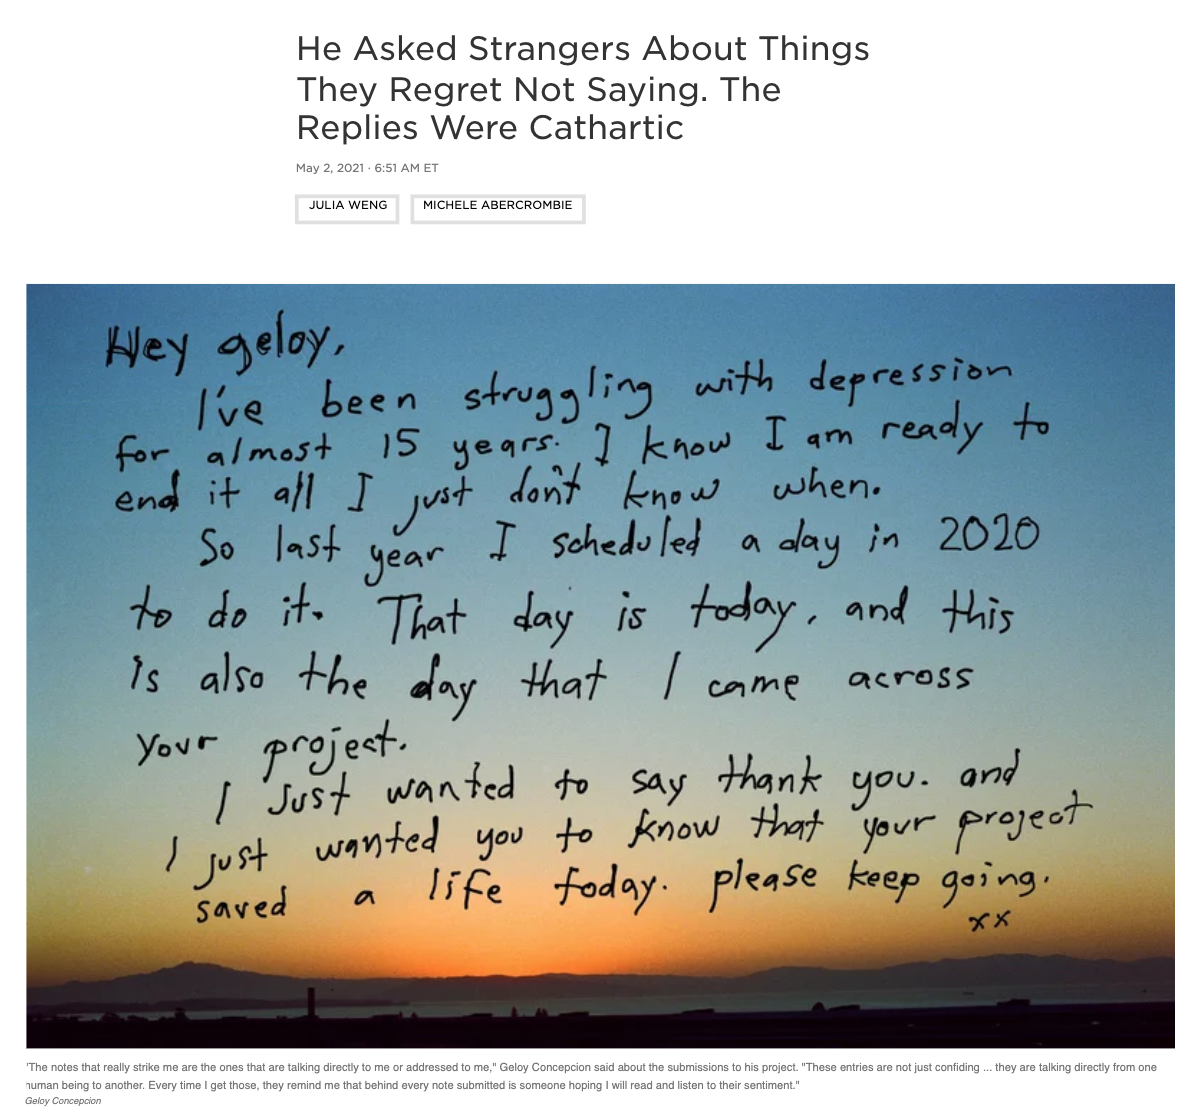 Photo Edit for NPR: He asked strangers about things they regret not saying. The replies were cathartic